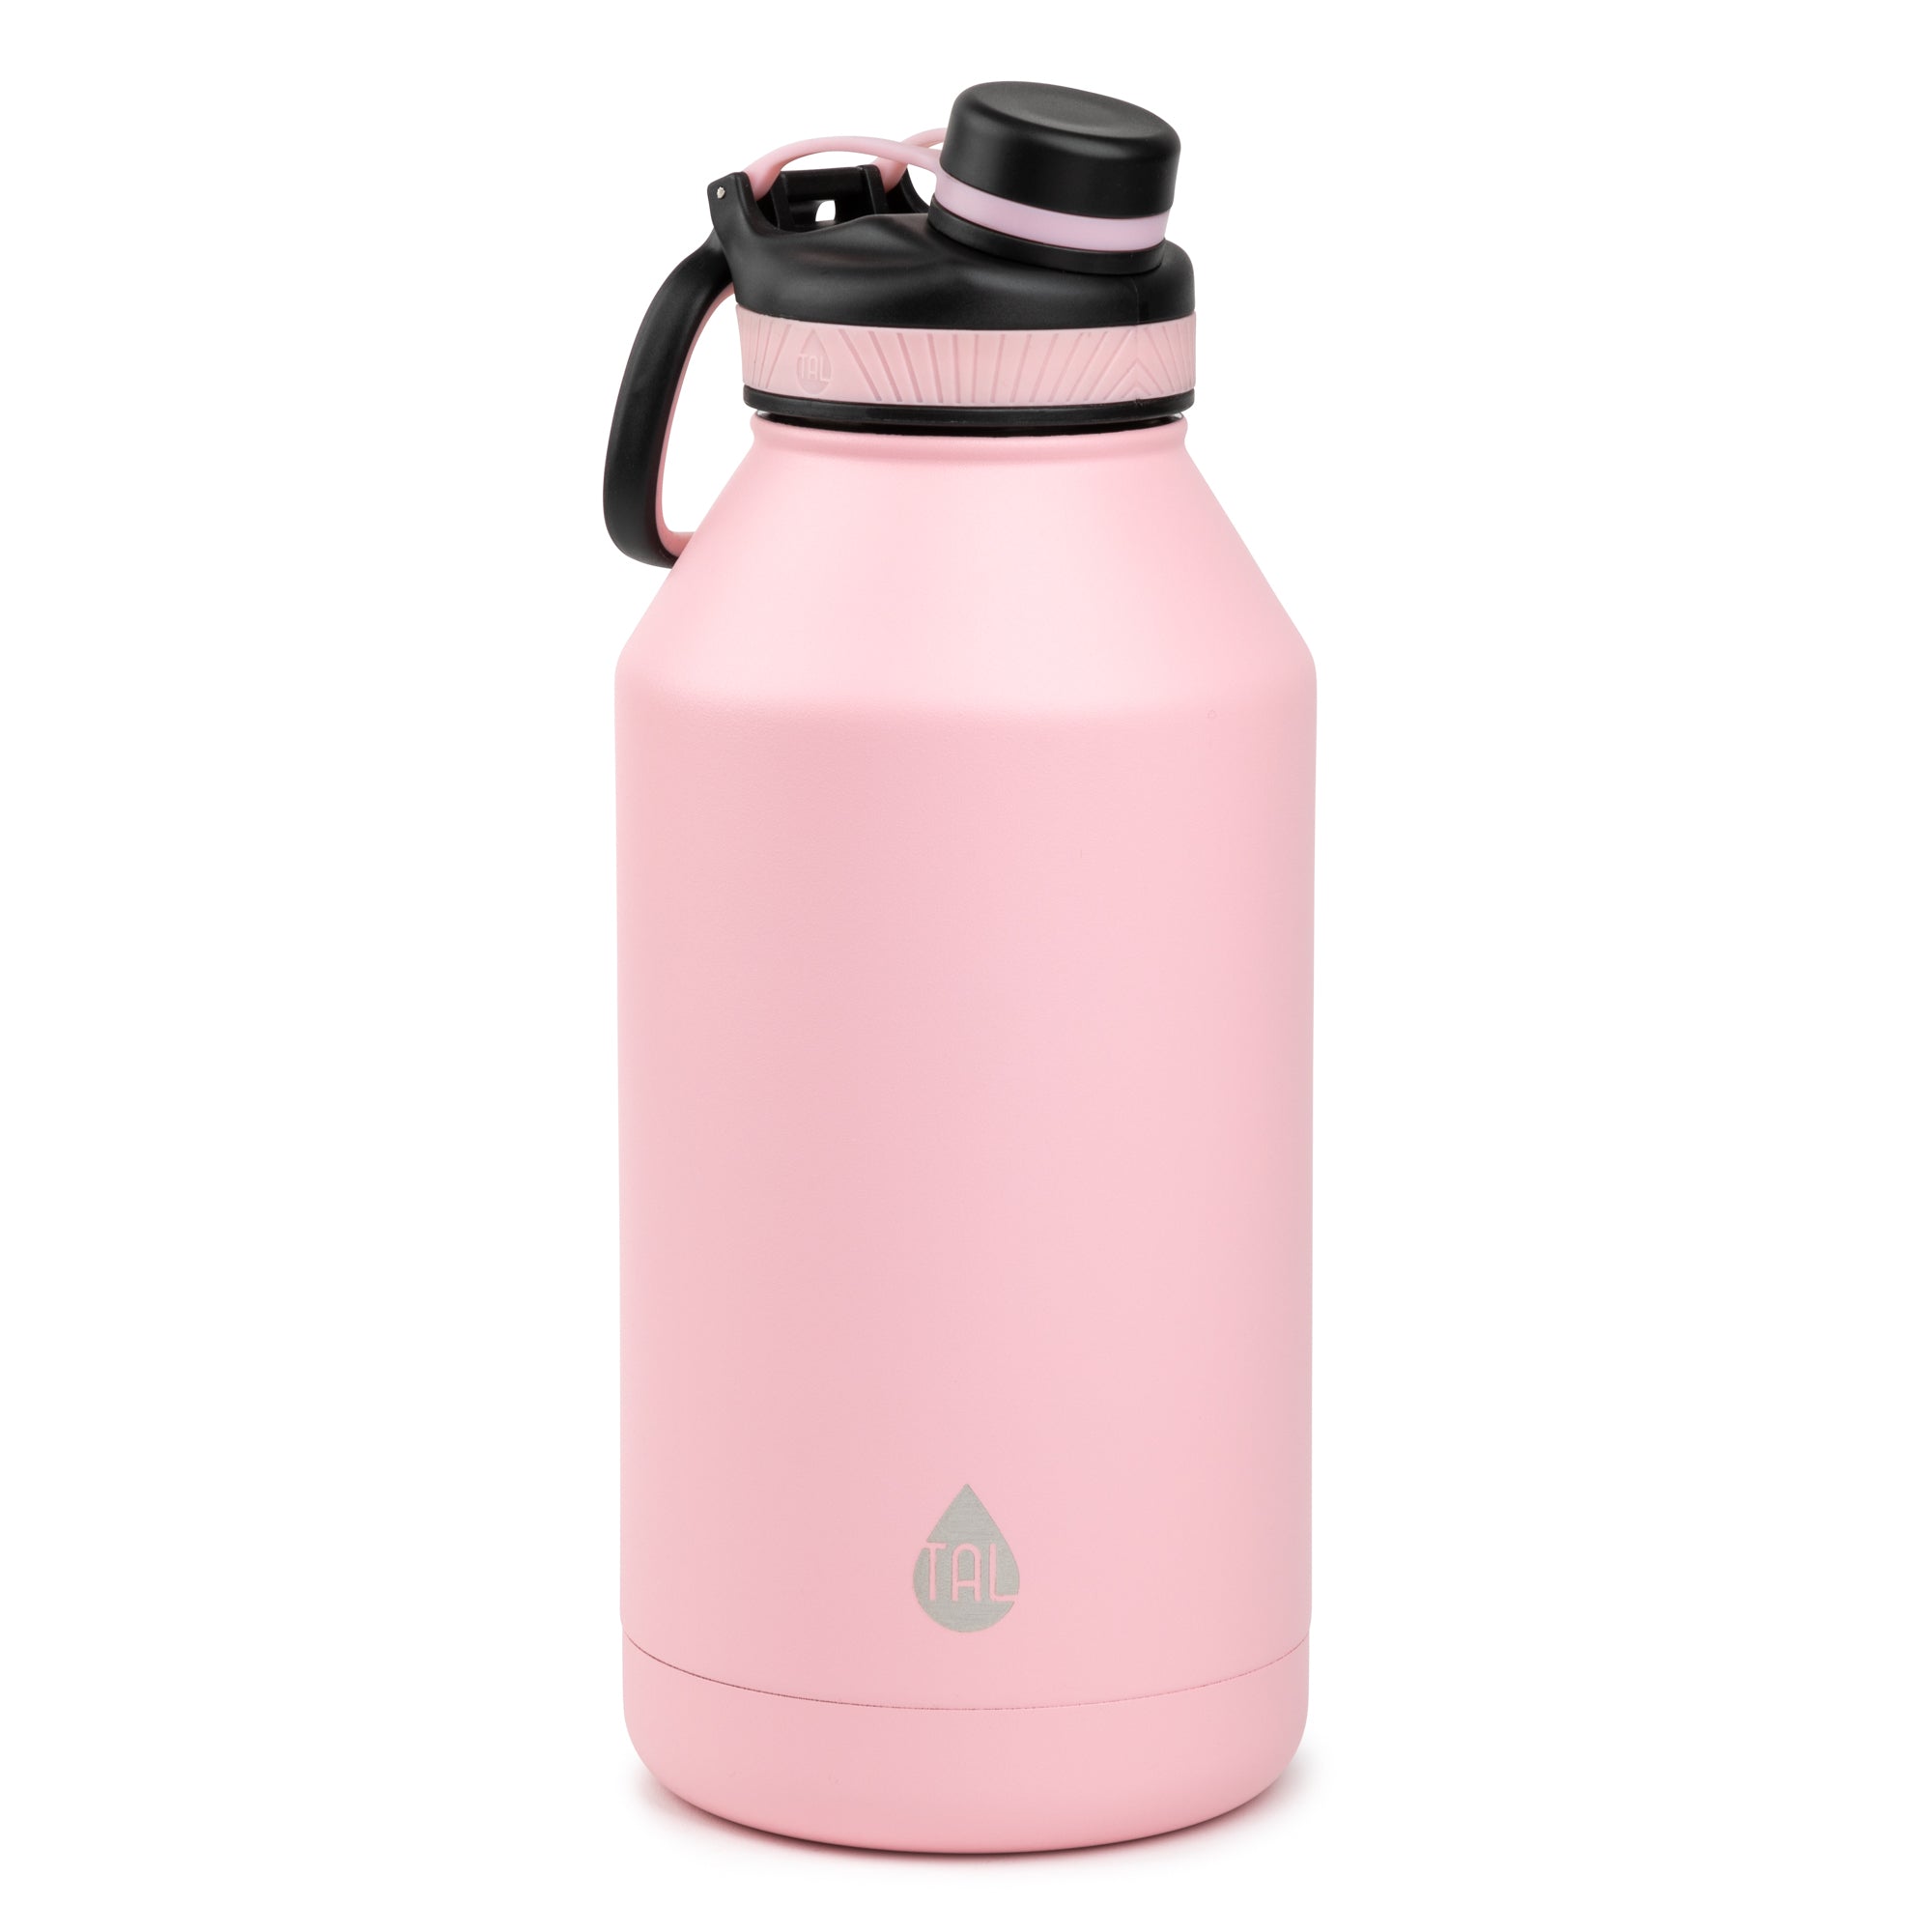 TAL Water Bottle Double Wall Insulated Stainless Steel Ranger Pro